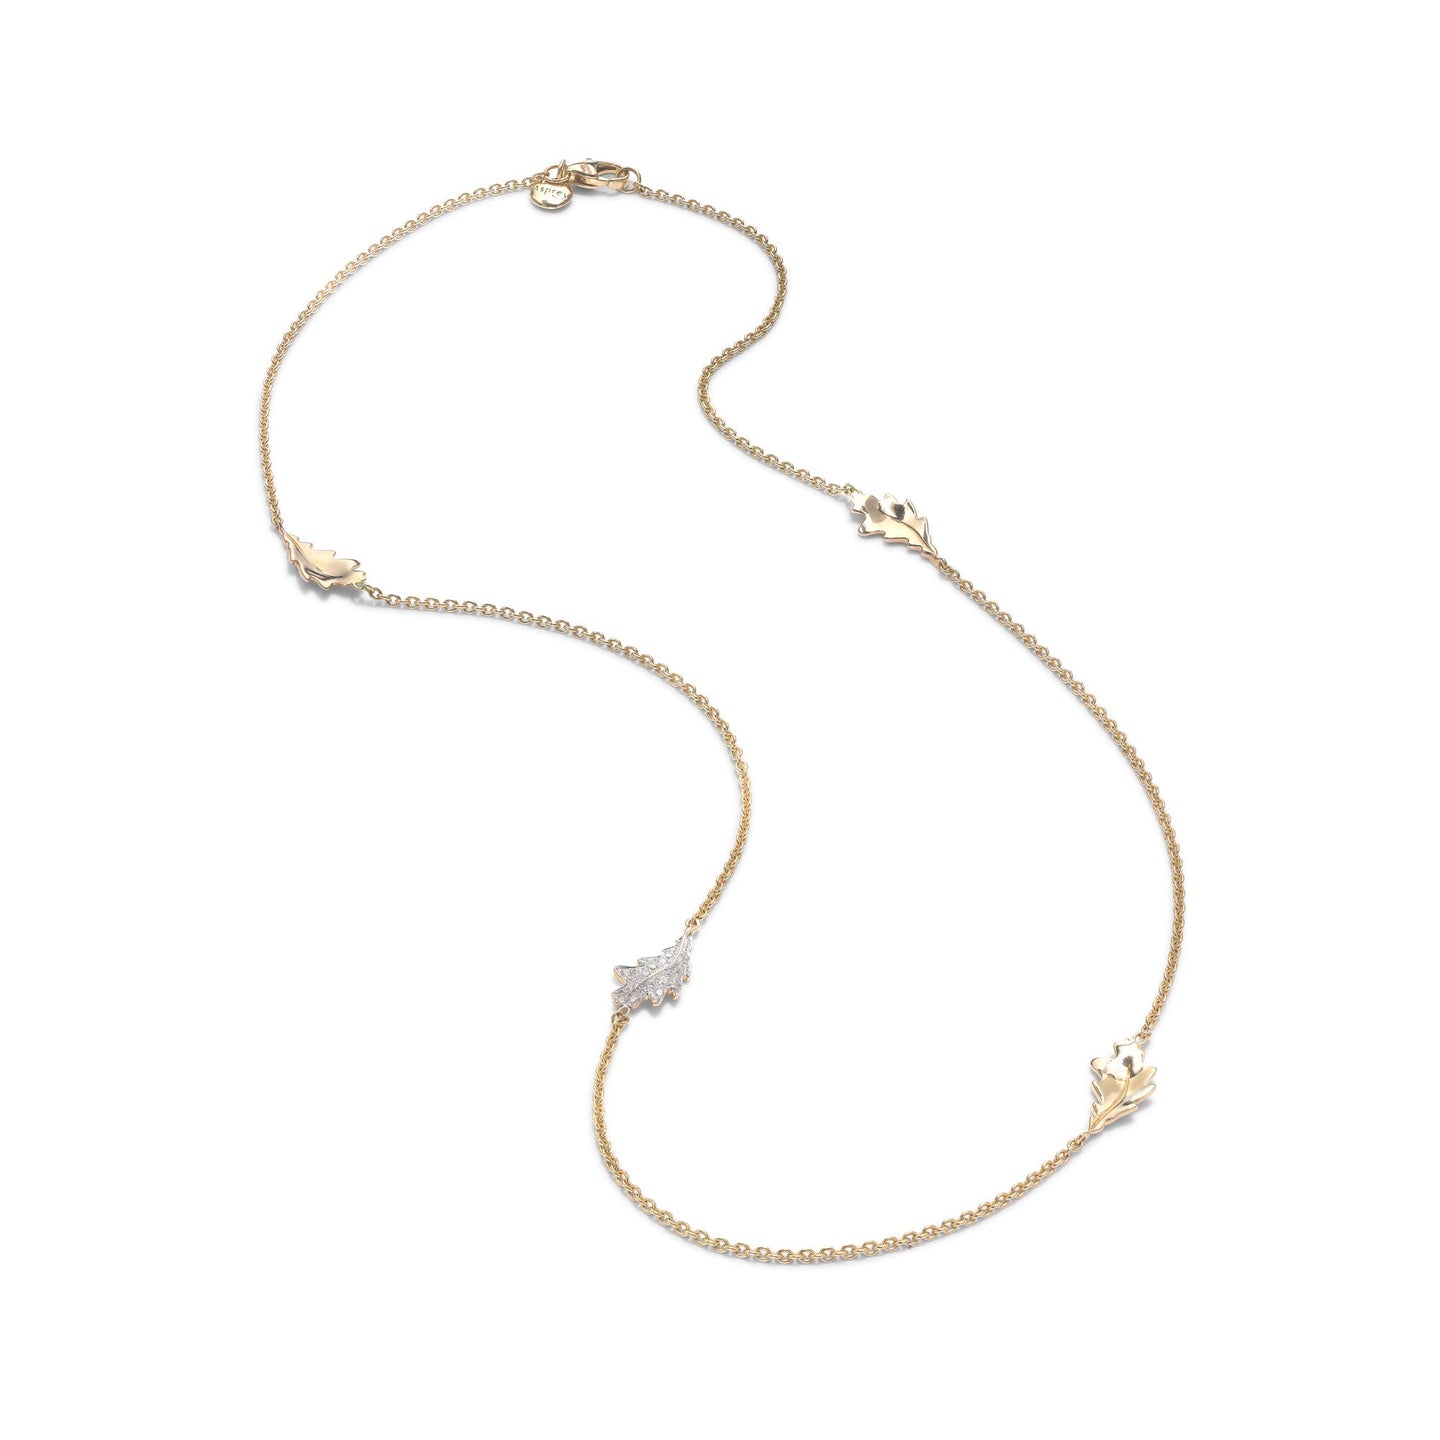 Woodland Four Oak leaf Necklace in 18ct Yellow Gold with Diamonds